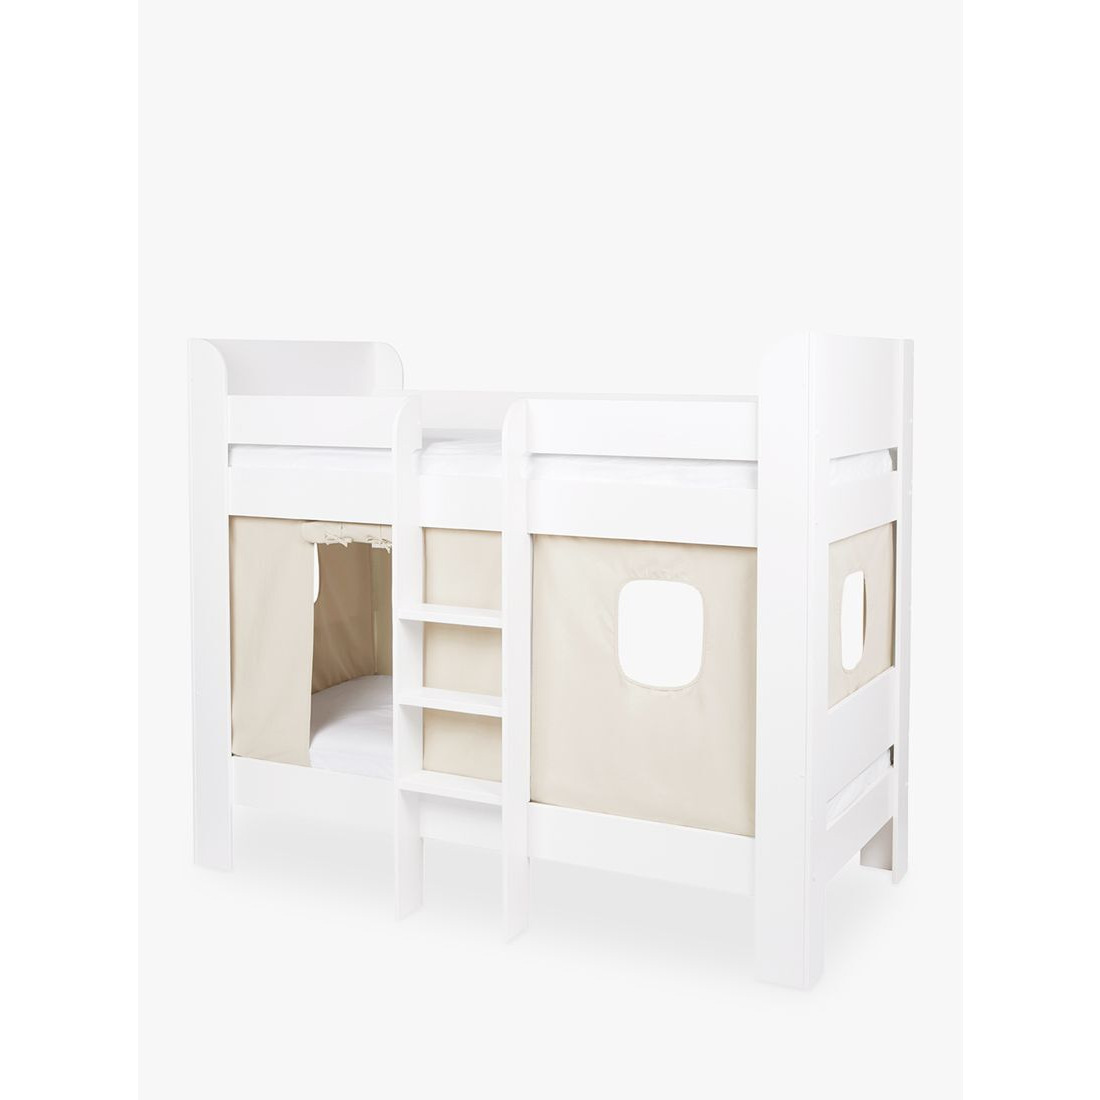 Great Little Trading Co Paddington Bunk Bed with Bed Curtain, White/Natural - image 1